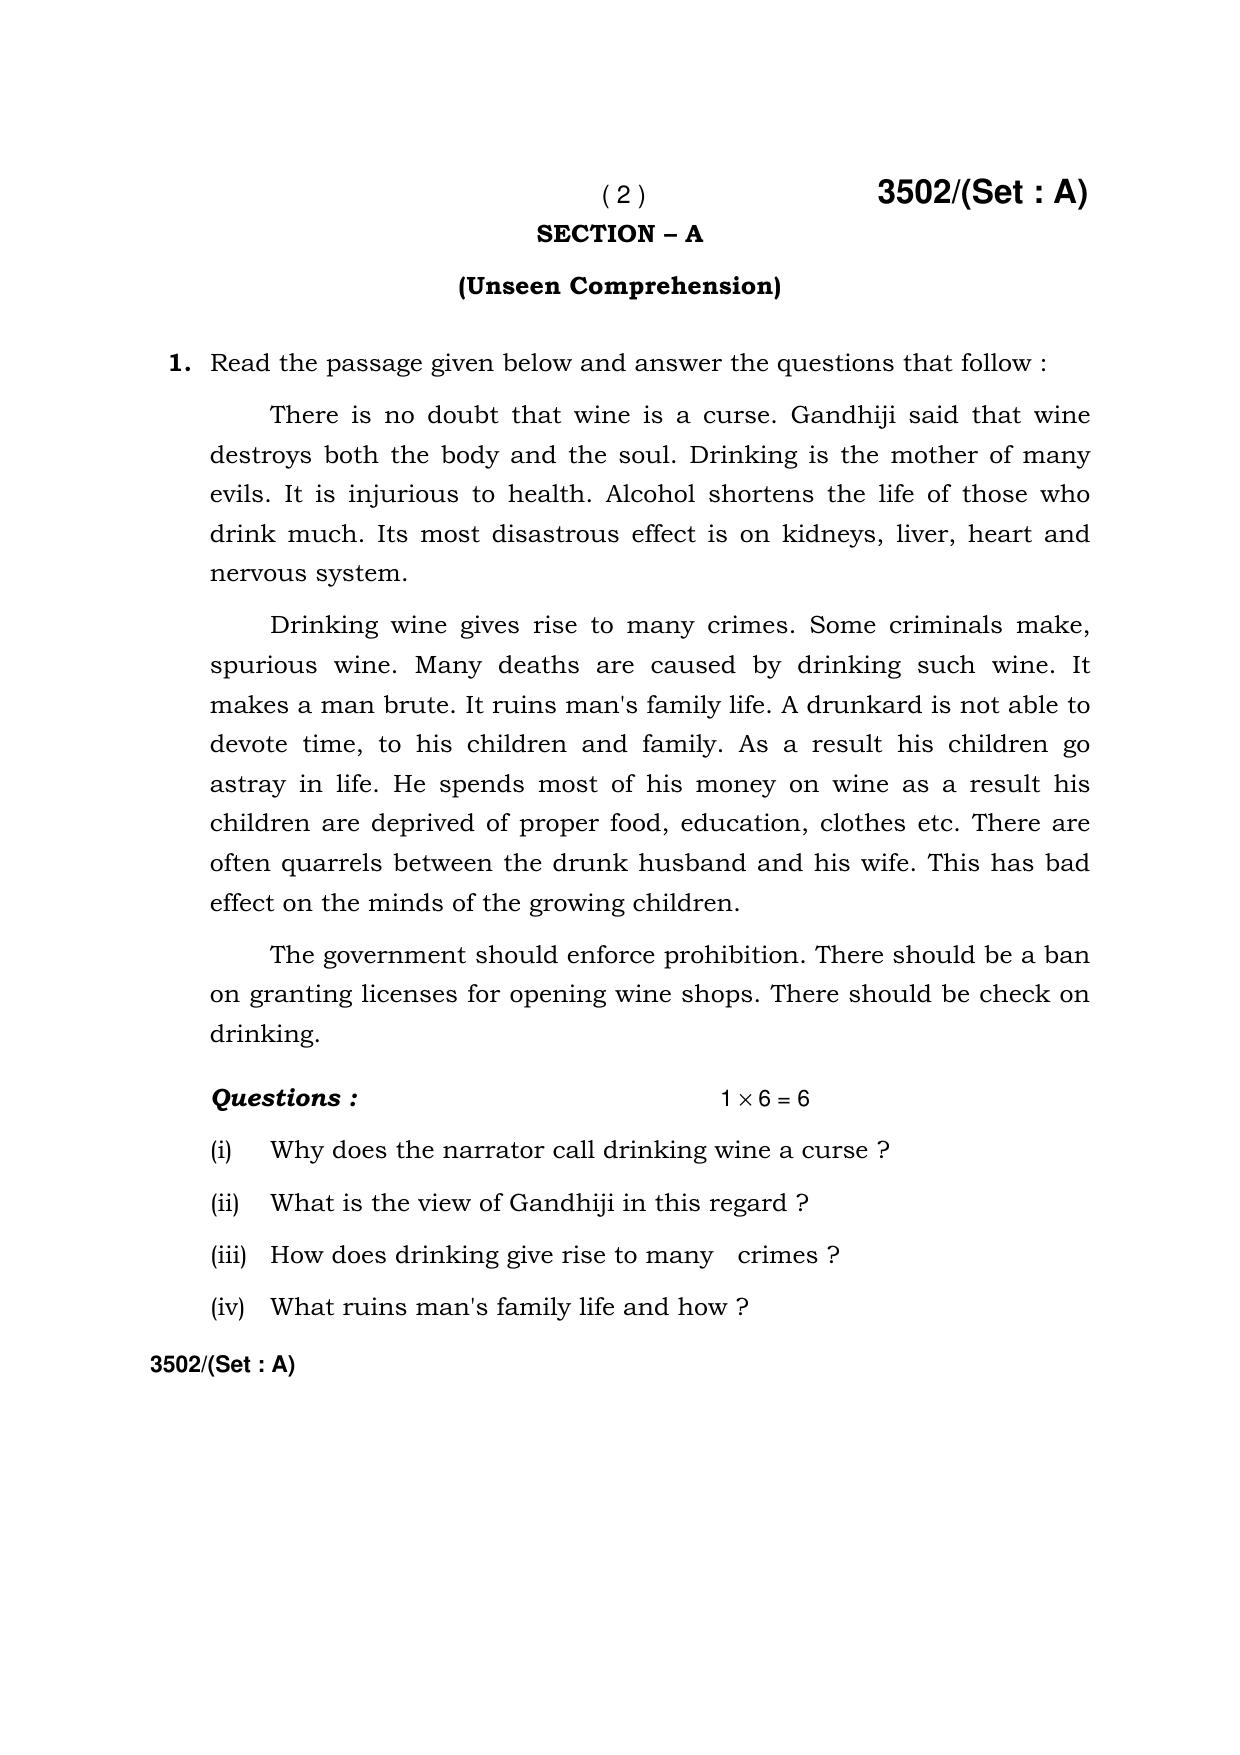 Haryana Board HBSE Class 10 English -A 2018 Question Paper - Page 2